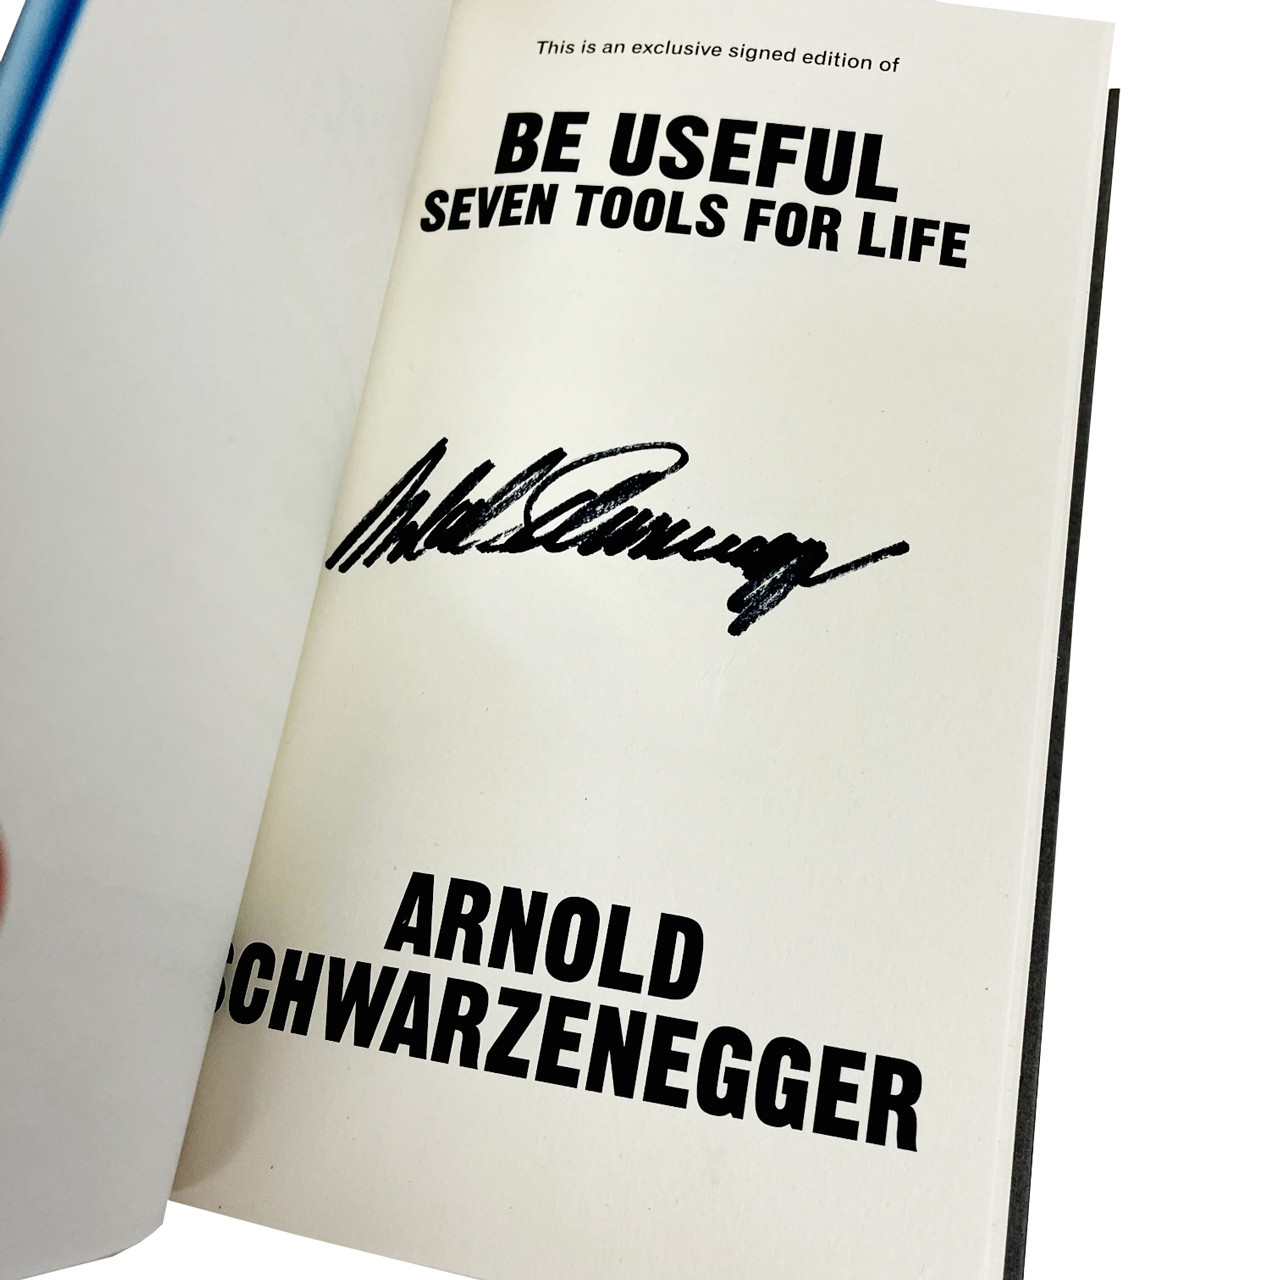 Arnold Schwarzenegger "Be Useful" Signed First Edition w/COA [Very Fine]